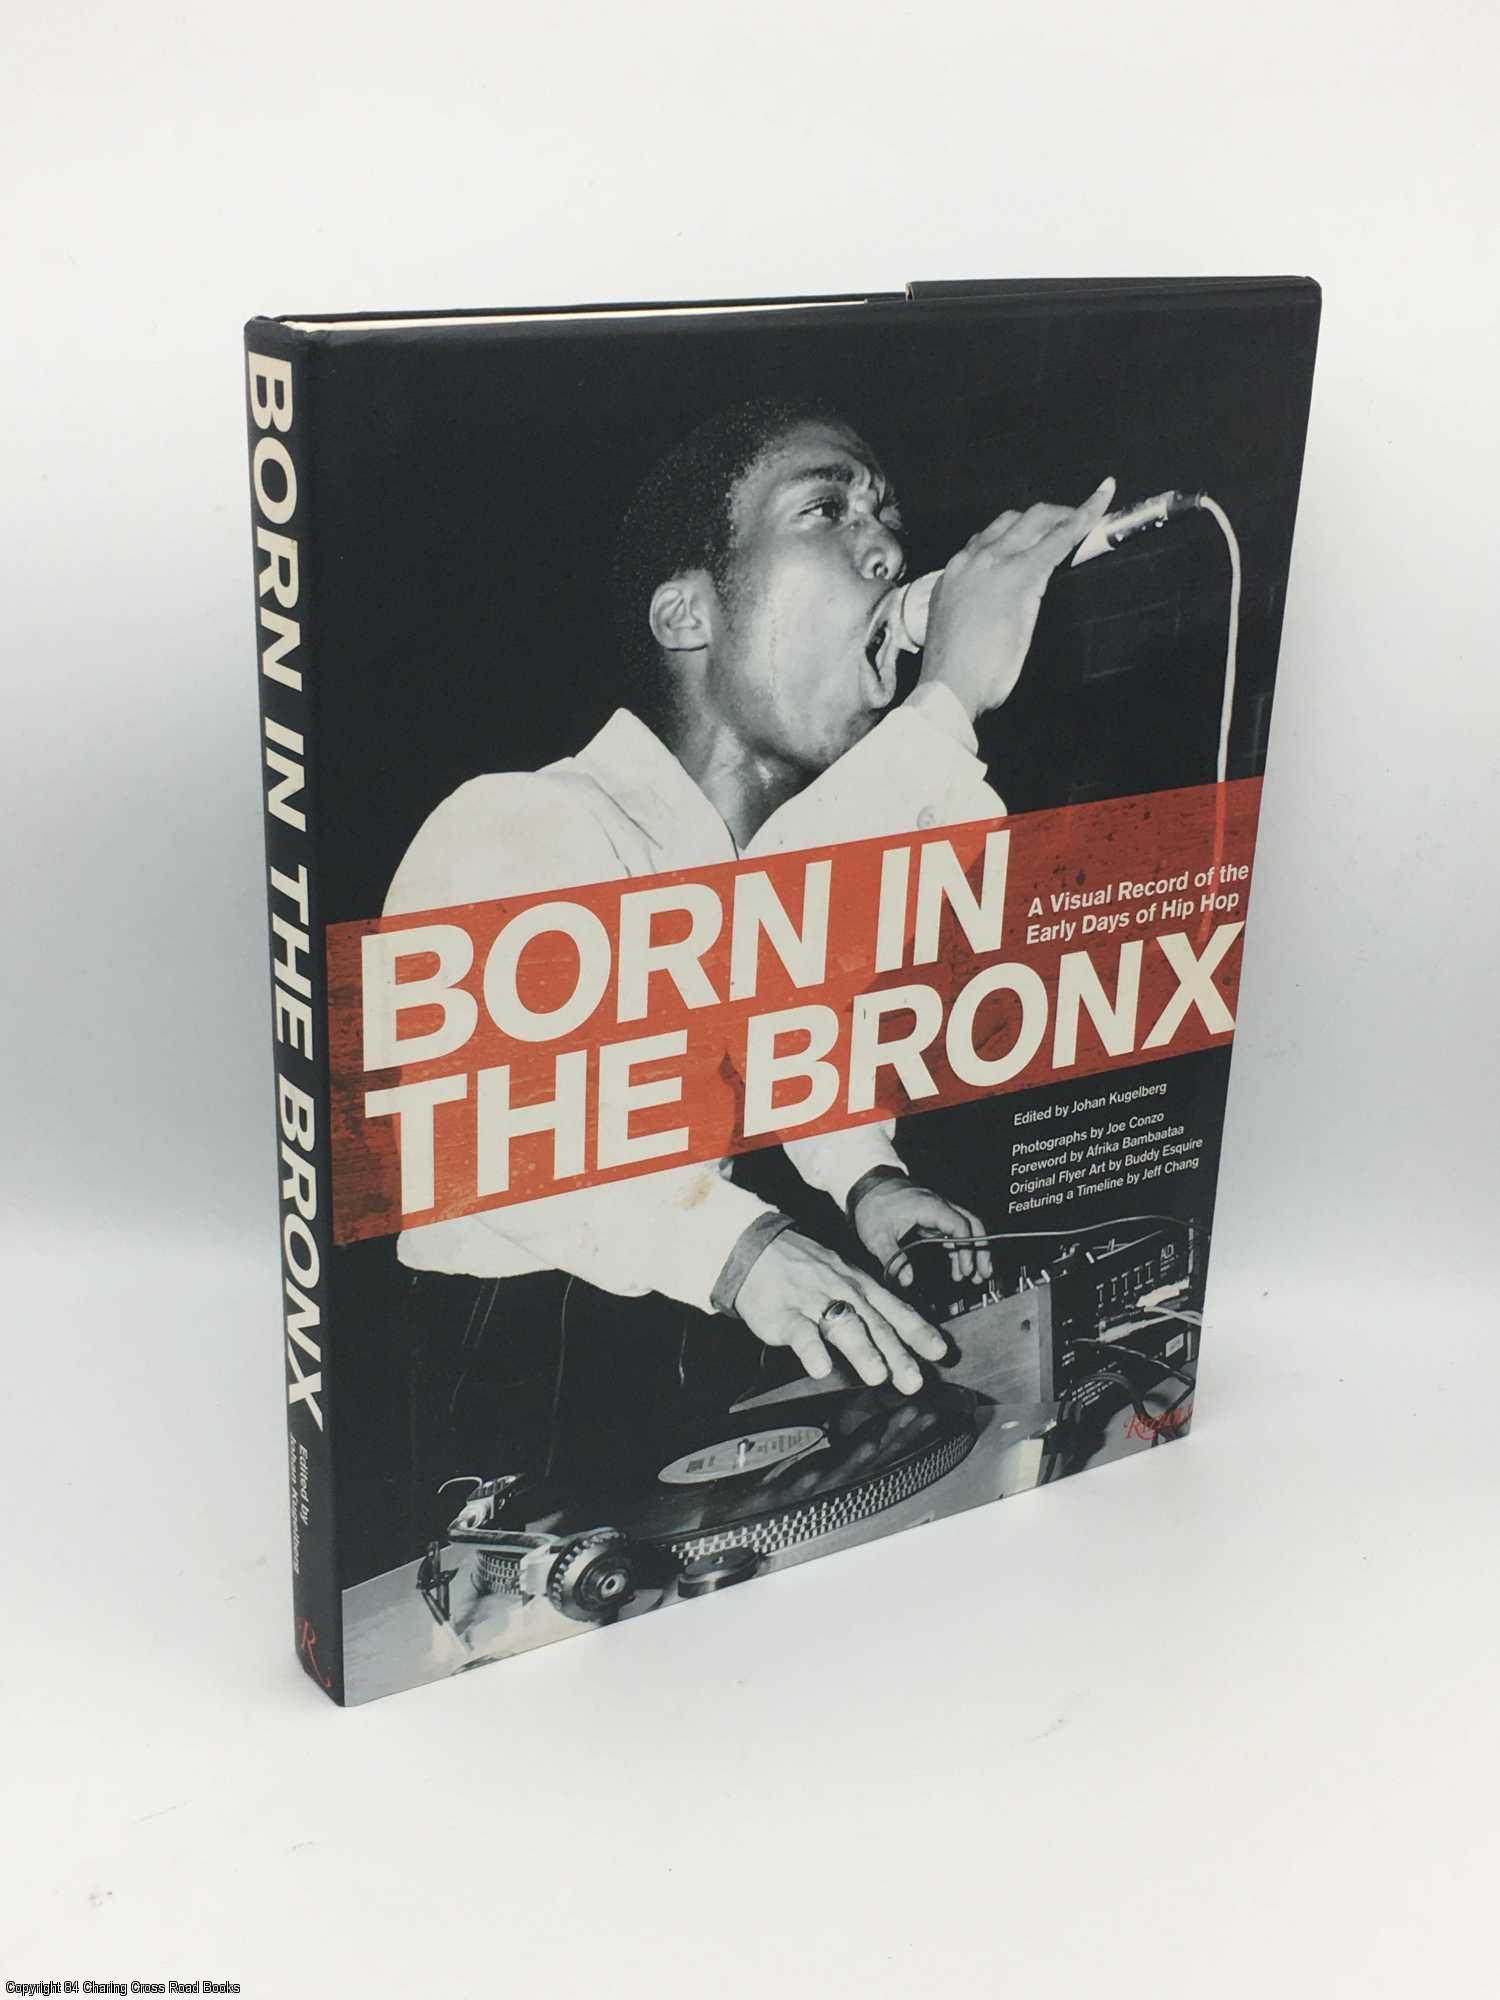 Born in the Bronx: A Visual Record of the Early Days of Hip Hop by Johan  Kugelberg on 84 Charing Cross Rare Books